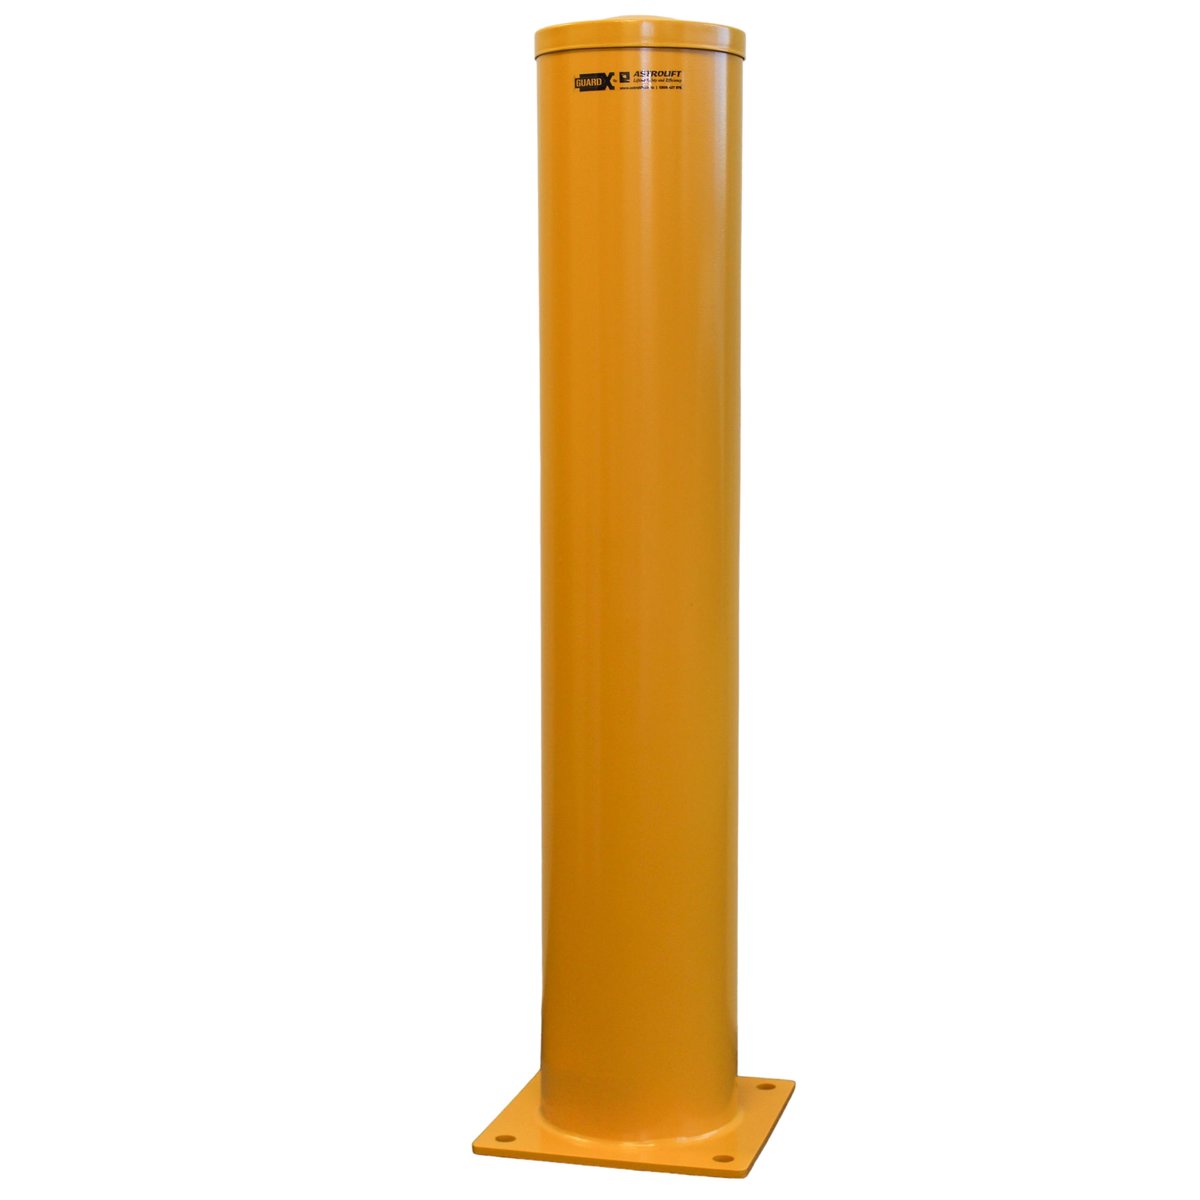 Buy Large Heavy Duty Bollard in Bolt-down Bollards from GuardX available at Astrolift NZ